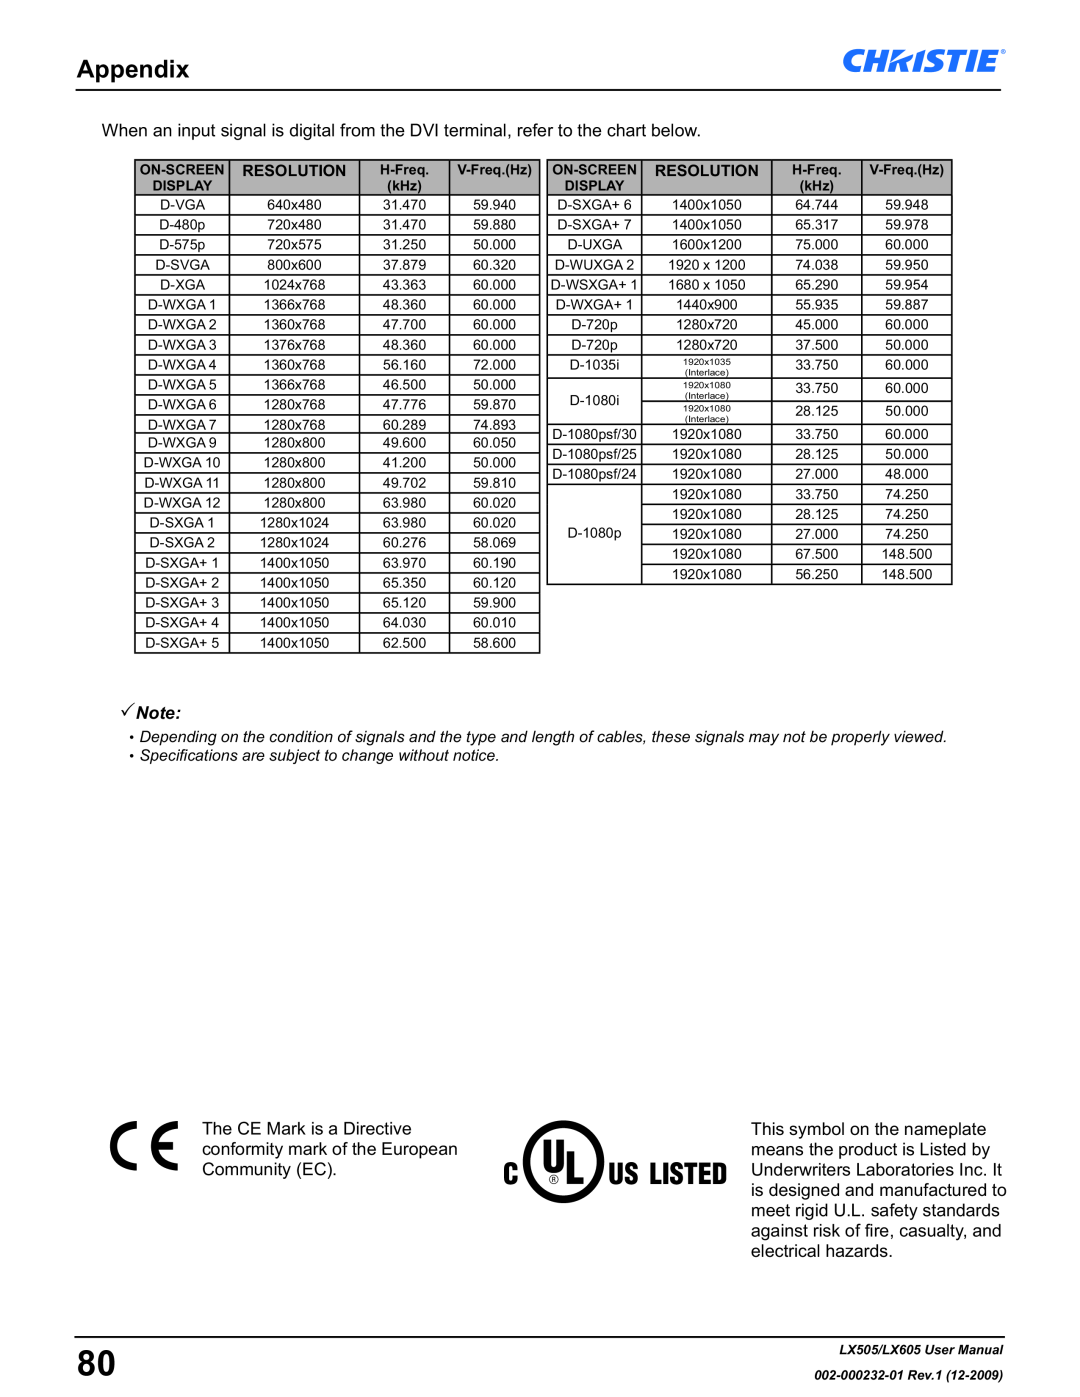 Christie Digital Systems LX605 manual Appendix, Specifications are subject to change without notice 